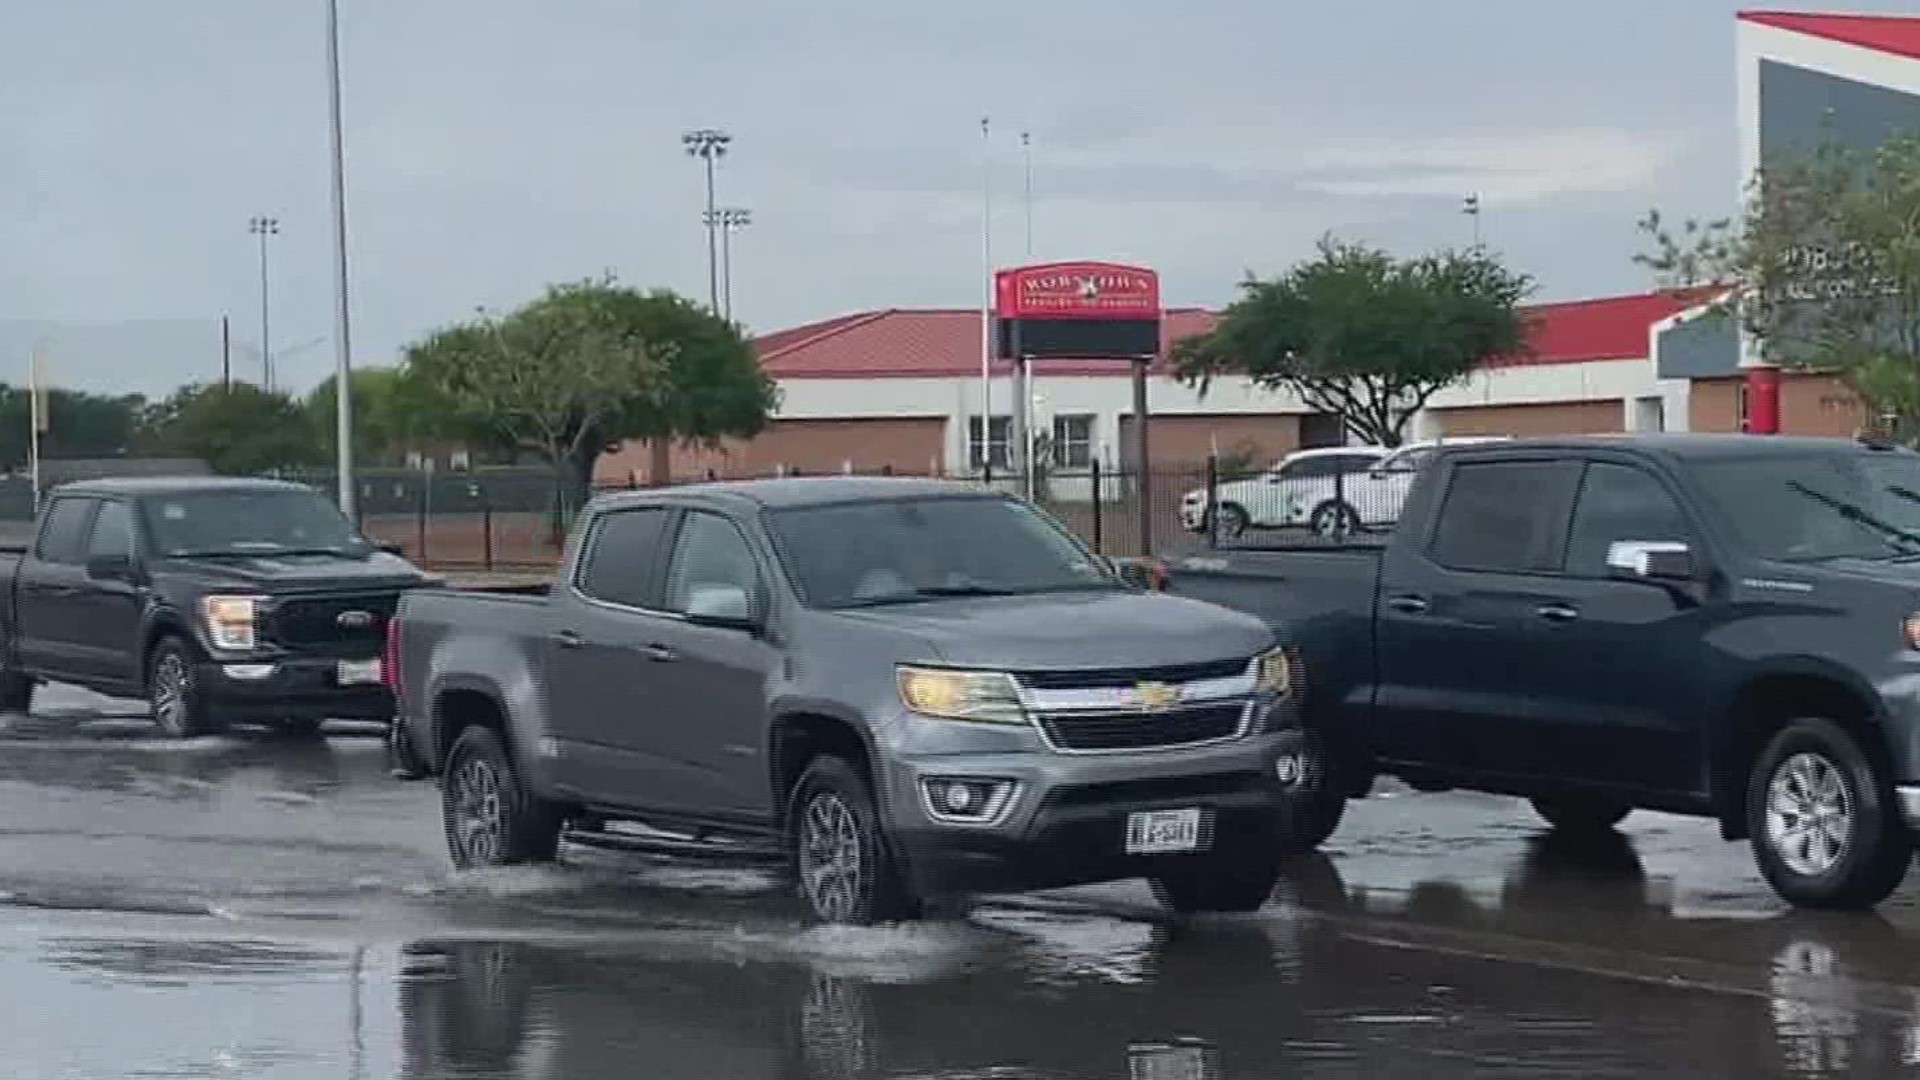 Robstown is part of a regional drainage study which can hopefully provide monies to fix what is causing the flooding, but that could take years.